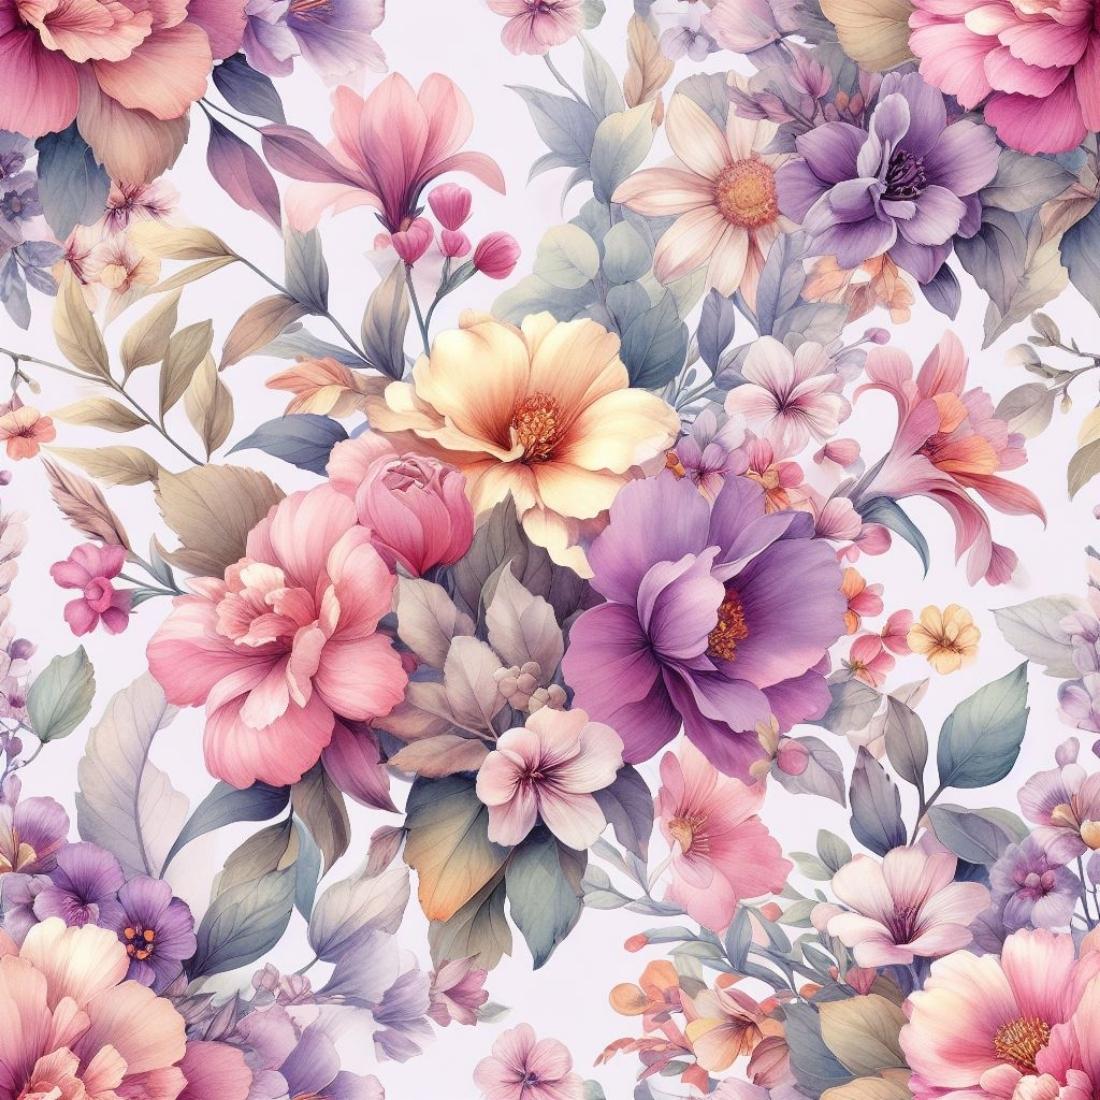 Flower patterns cover image.